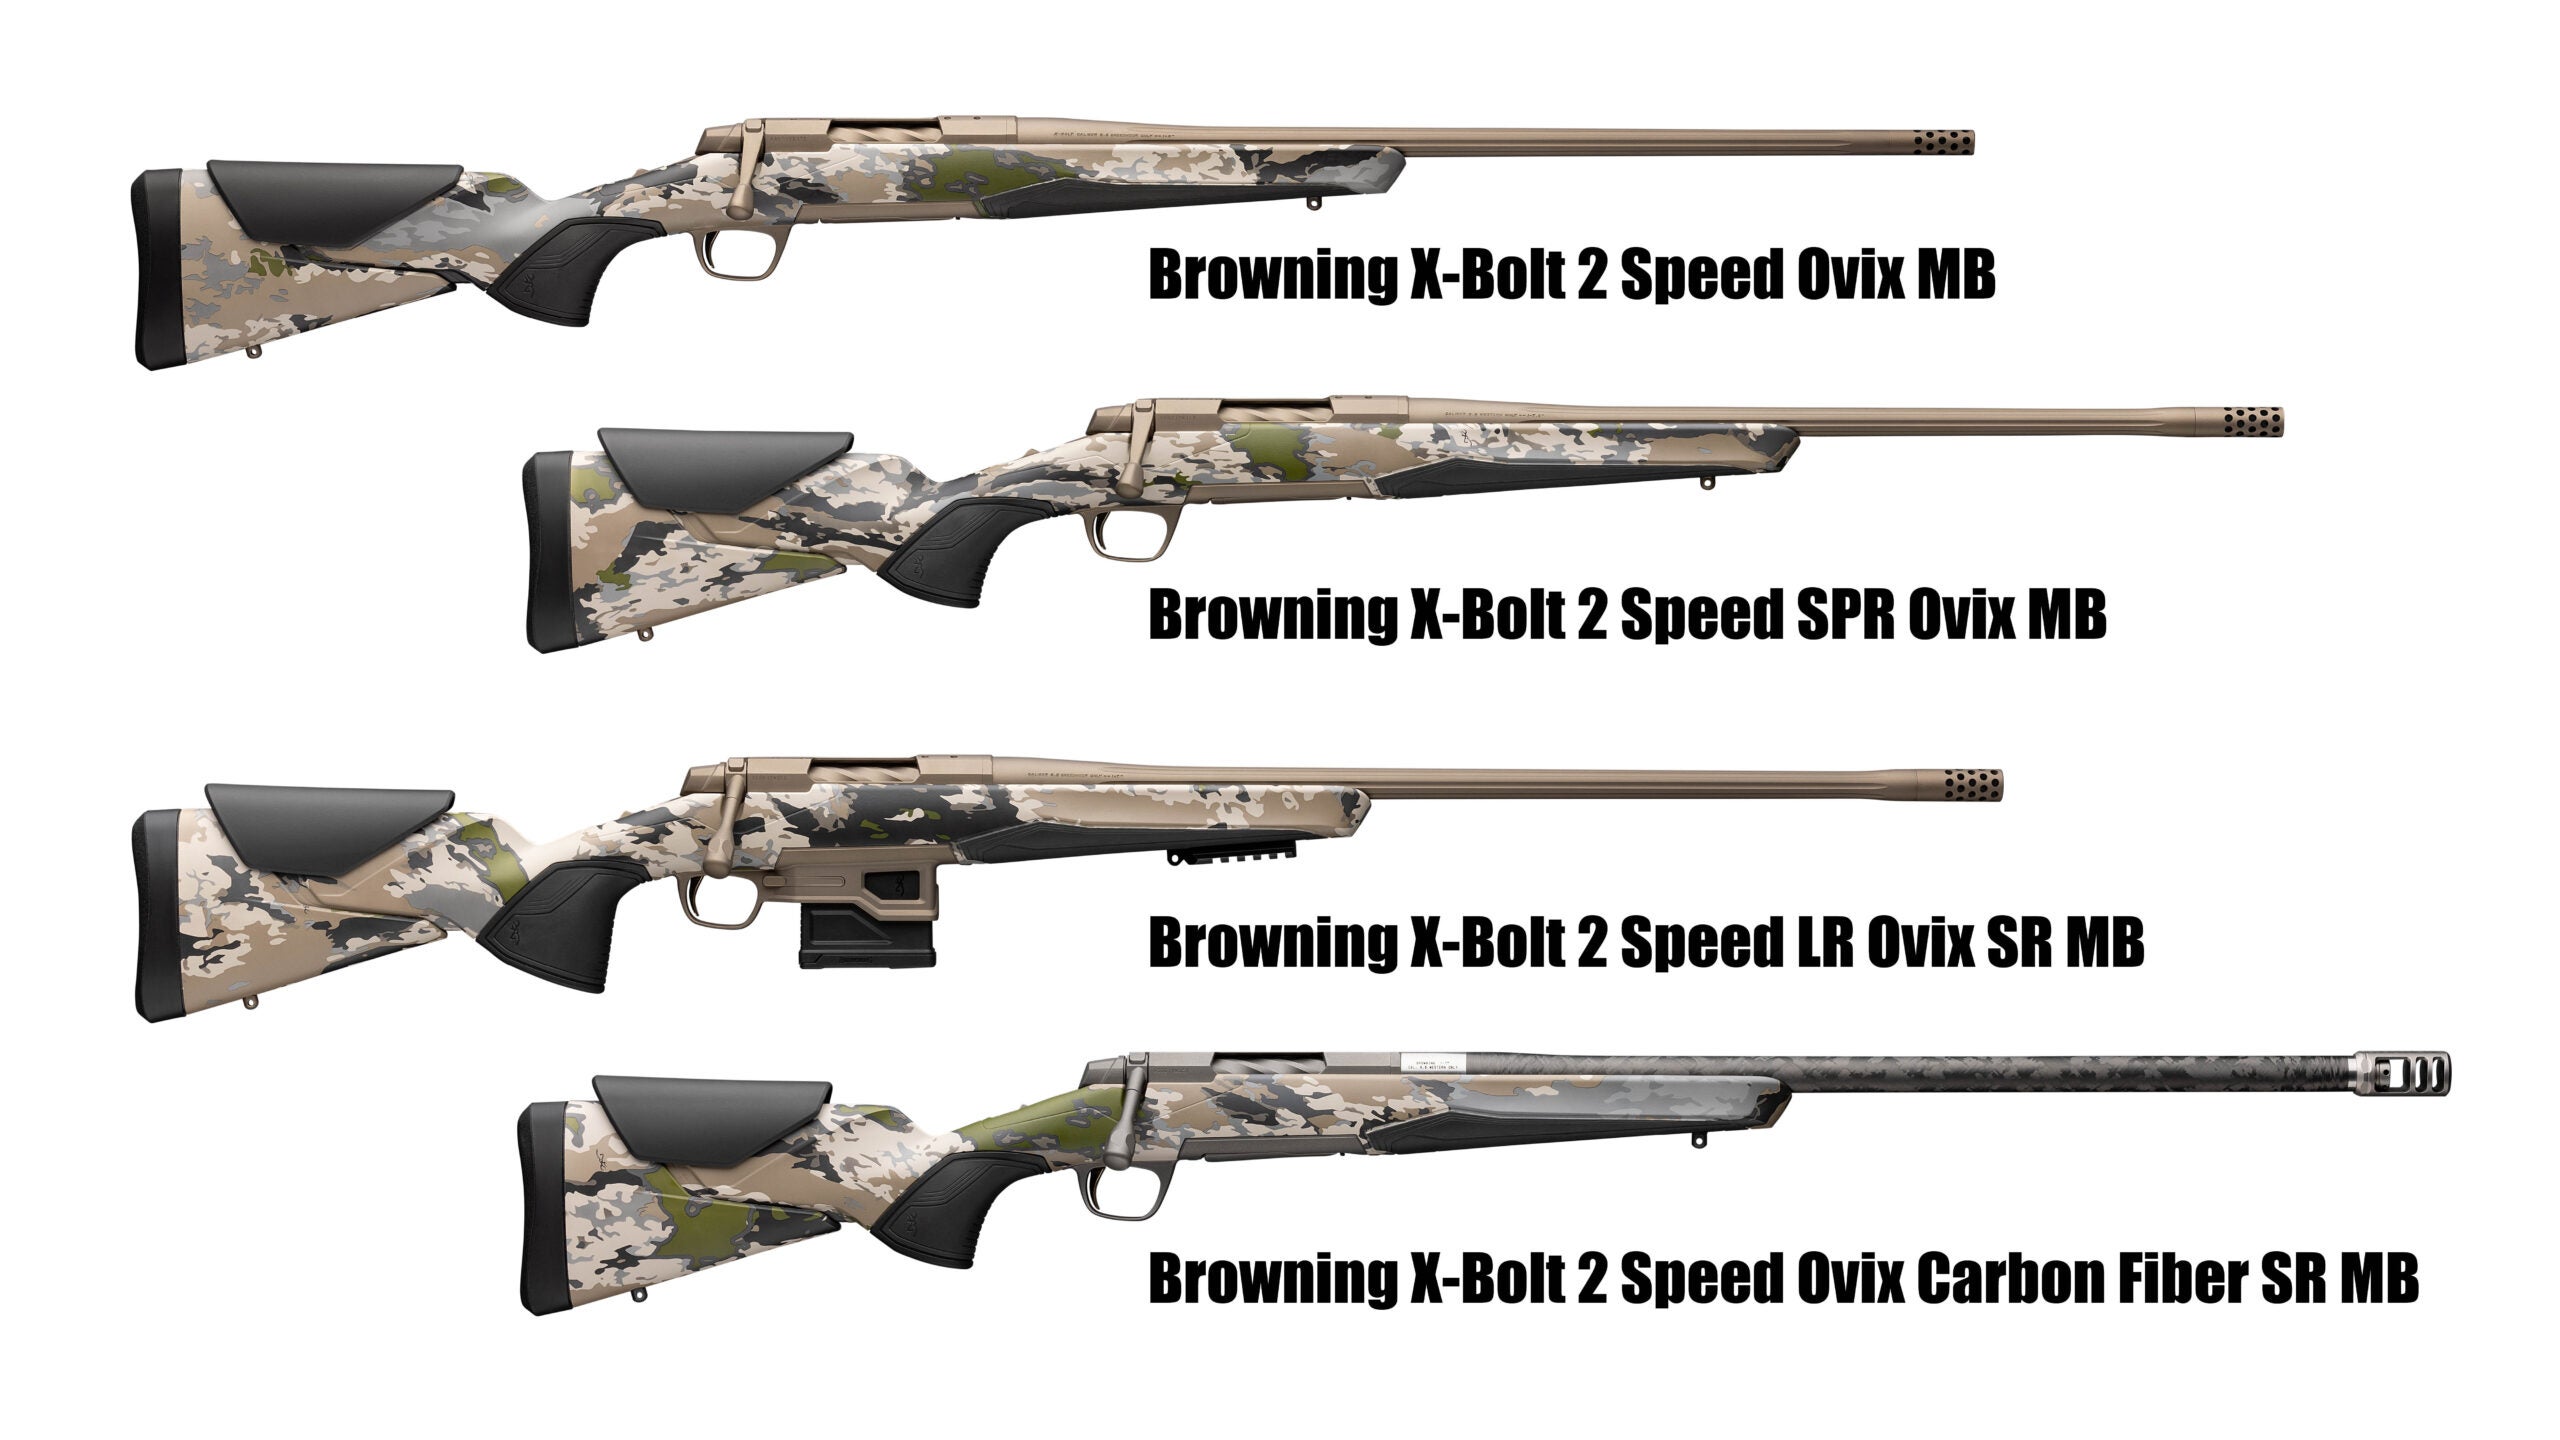 Four versions of the new Browning X-Bolt 2 Speed Ovix rifle on white background